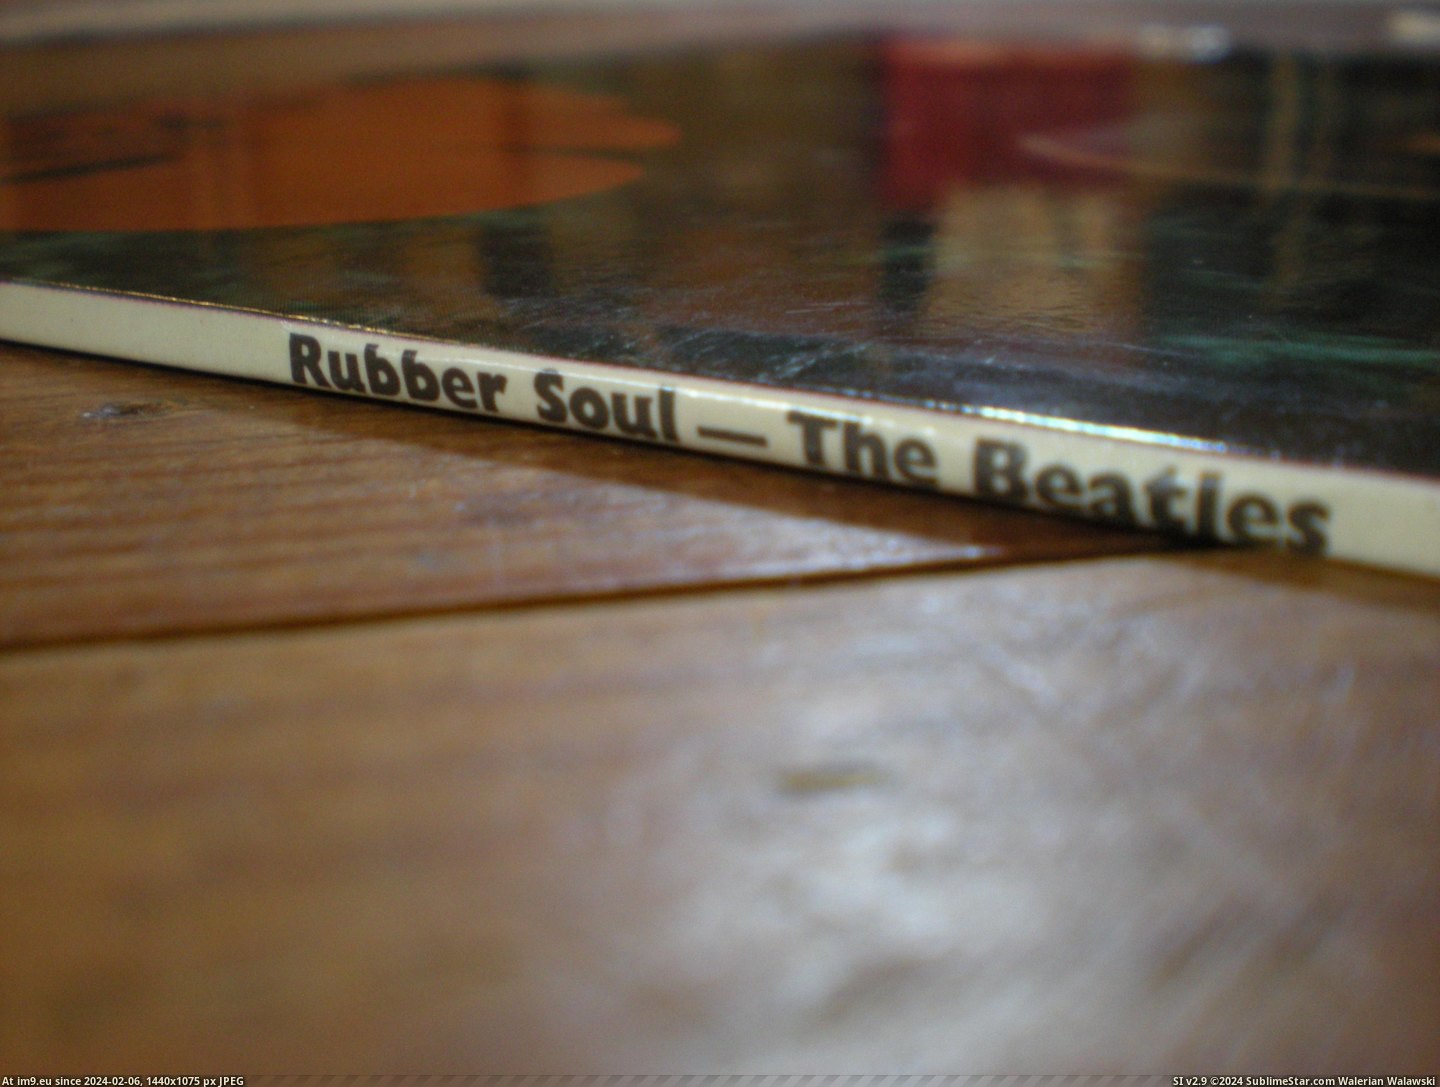  #Rubber  Rubber-4-4 7 Pic. (Image of album new 1))